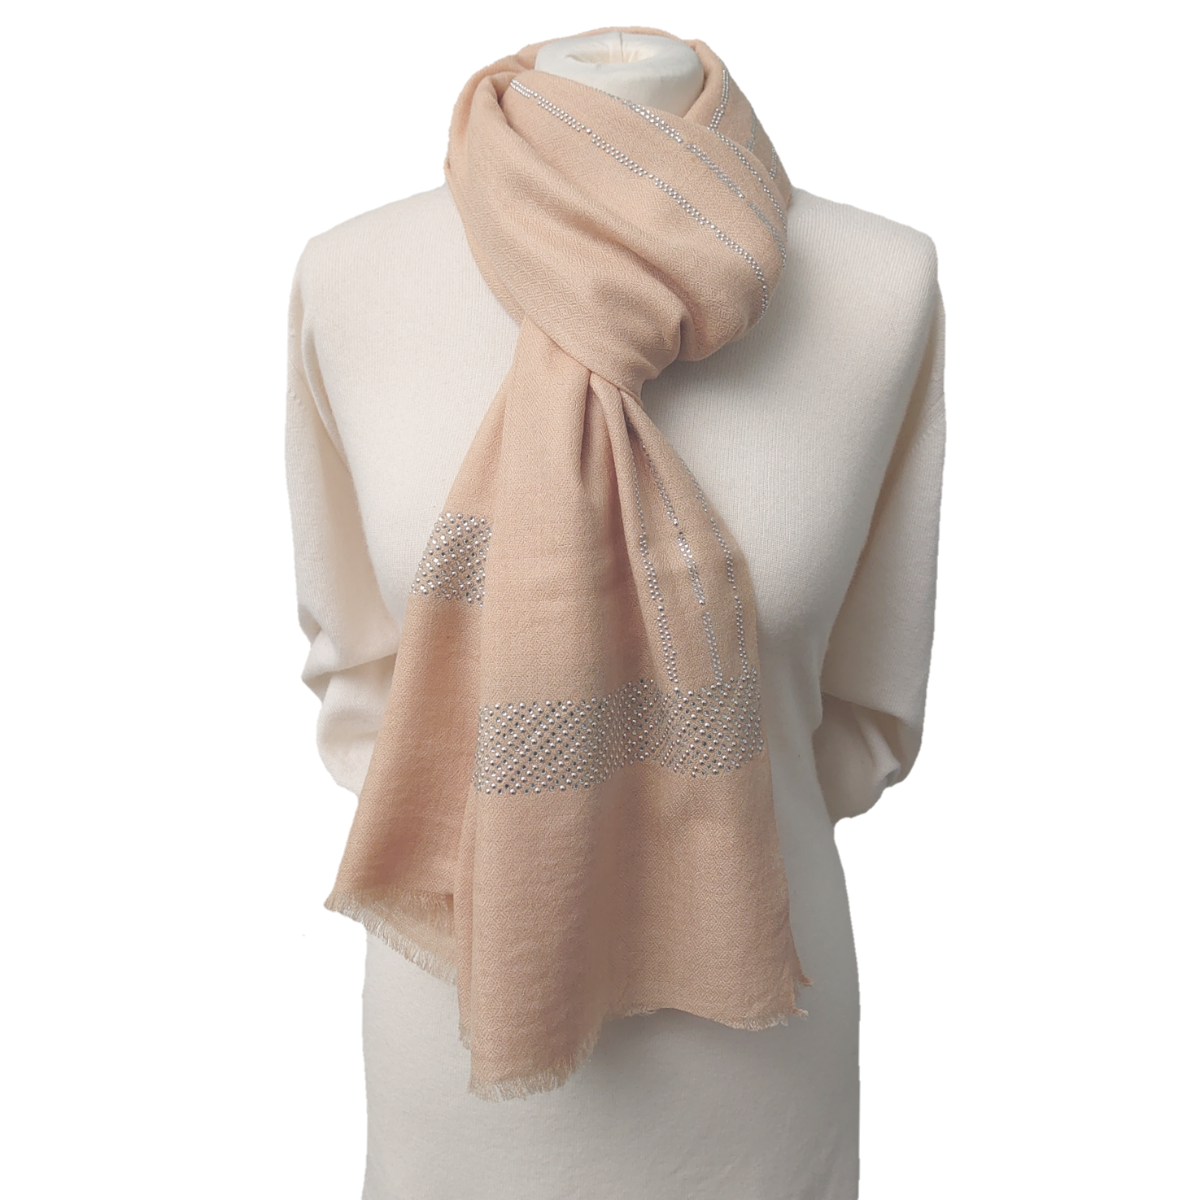 Ltd Edition Fine Pashmina Stole - Large Scarf With Hand-Applied Crystals - Camel